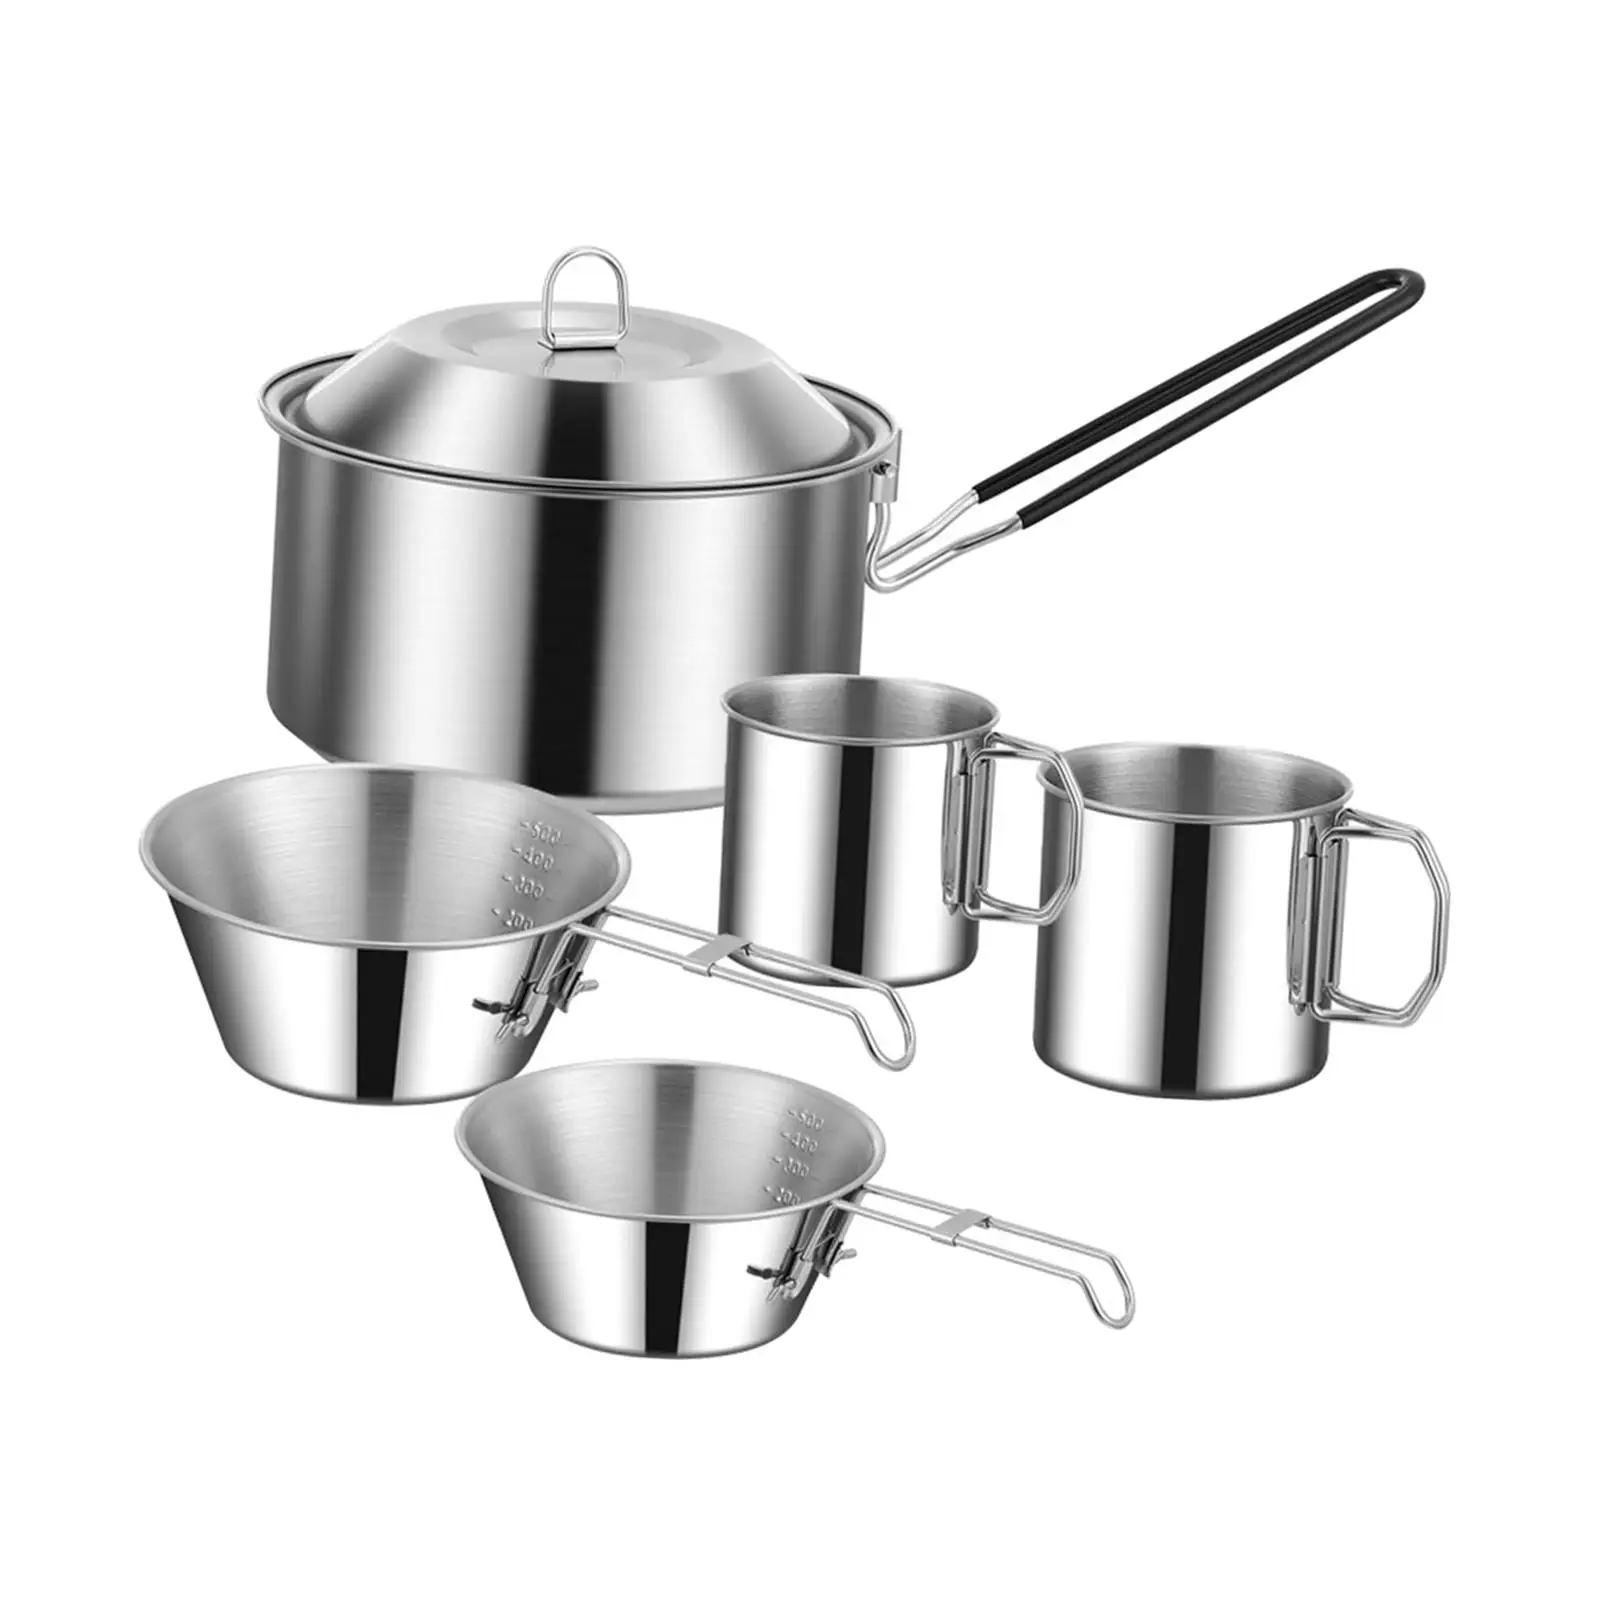 Cooking Pot Set Camping Handle Lightweight Portable Folding Stackable with Lid for Backpacking Travel Picnic Household Barbecue